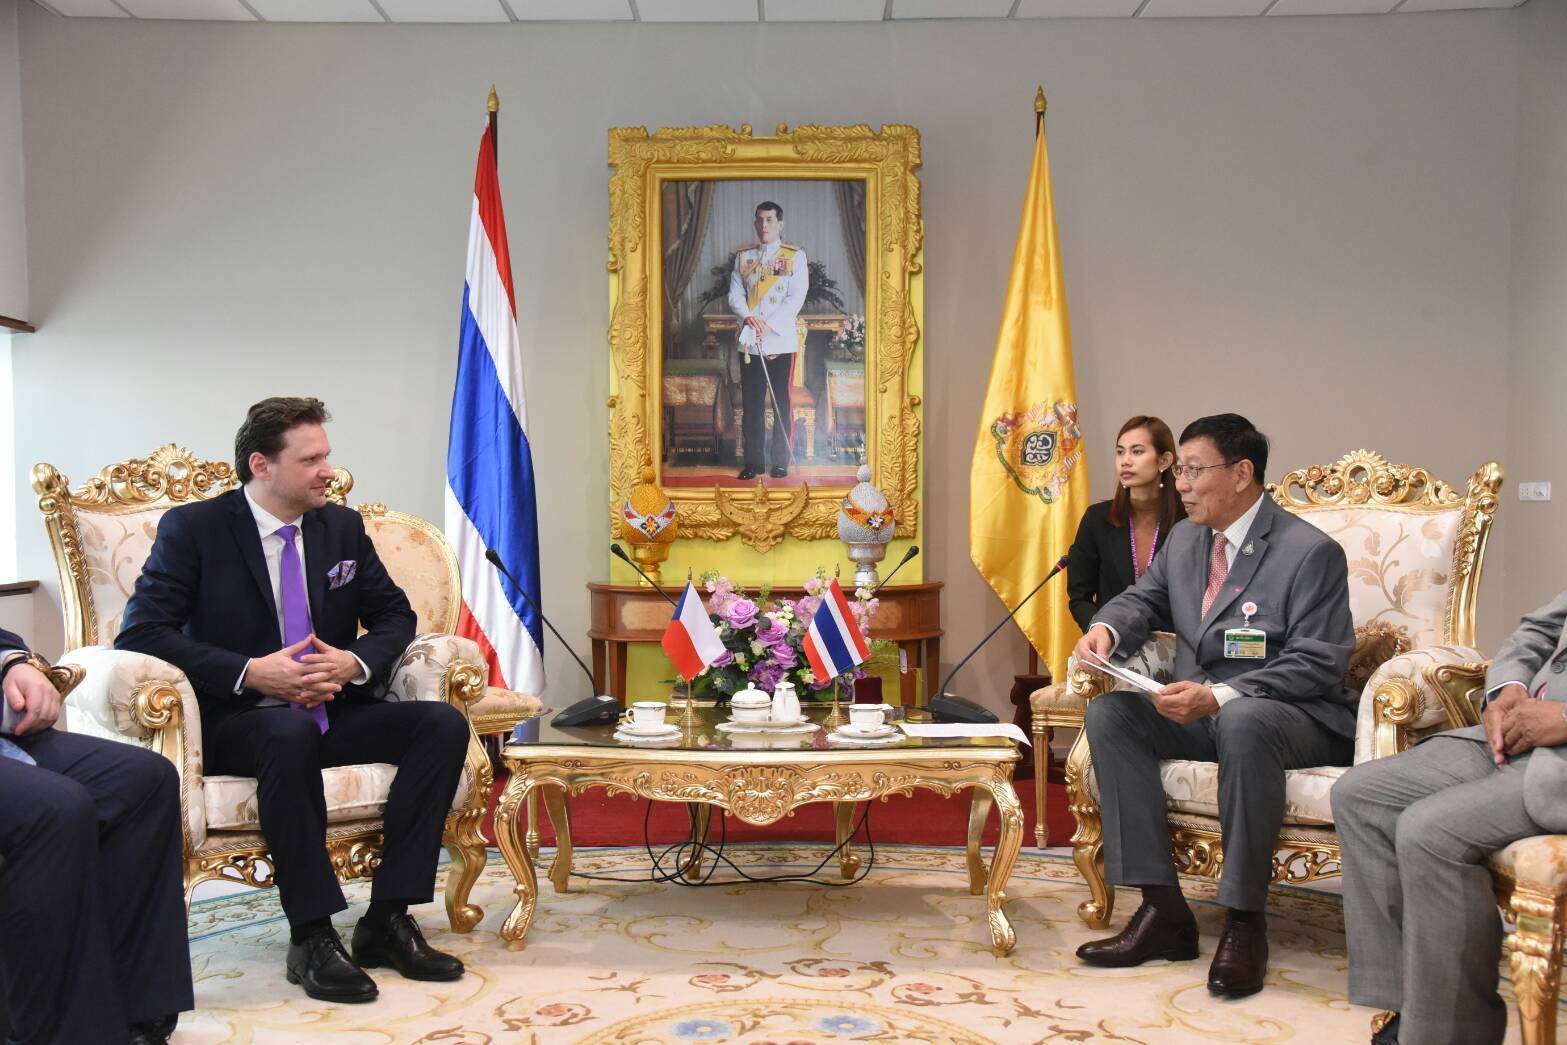 Prof. Pronpetch Wichitcholchai, President of the Senate Welcomed and Hosted a luncheon in Honour of H.E. Mr. Radek Vondráček, Speaker of the Chamber of Deputies of deputies of the Parliament of the Czech Republic (Tuesday 18 February 2020)